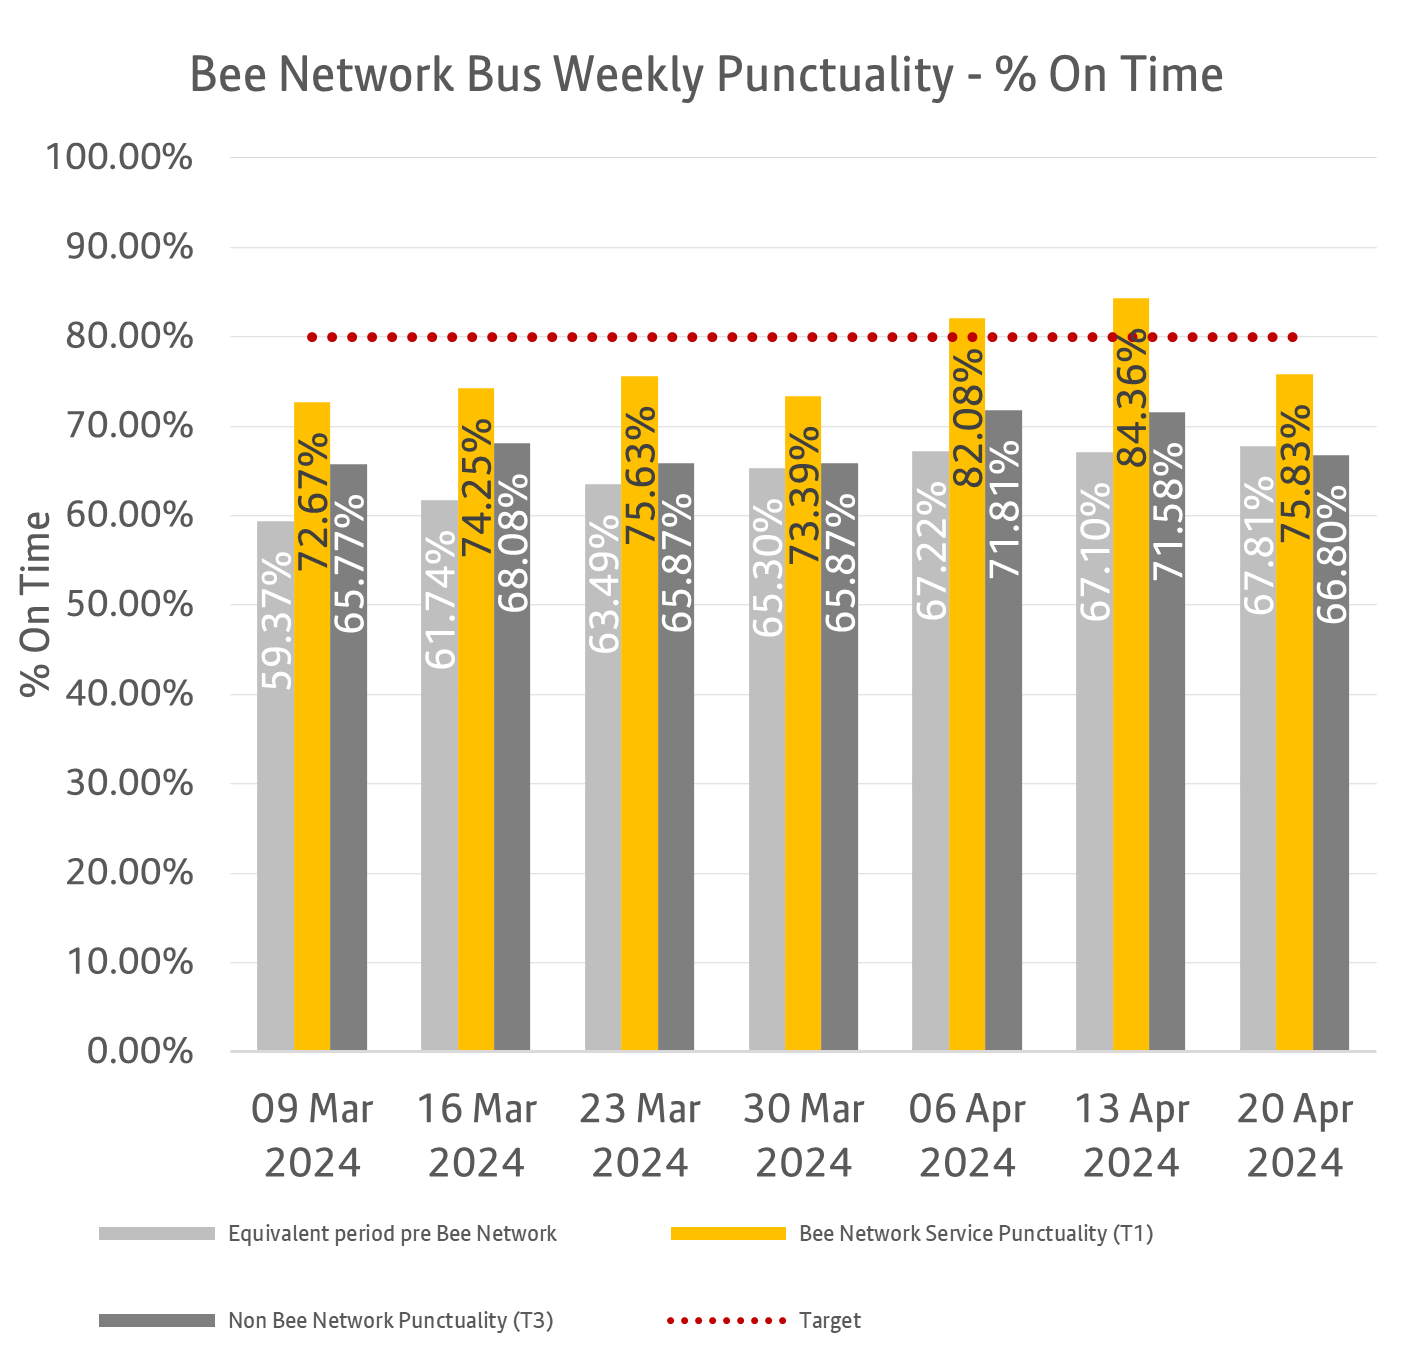 The chart shows weekly punctuality data for Bee Network services and non-Bee Network services until ending 20th April 2024. It also shows punctuality data for the same services that are now part of the Bee Network, before they came under local control.